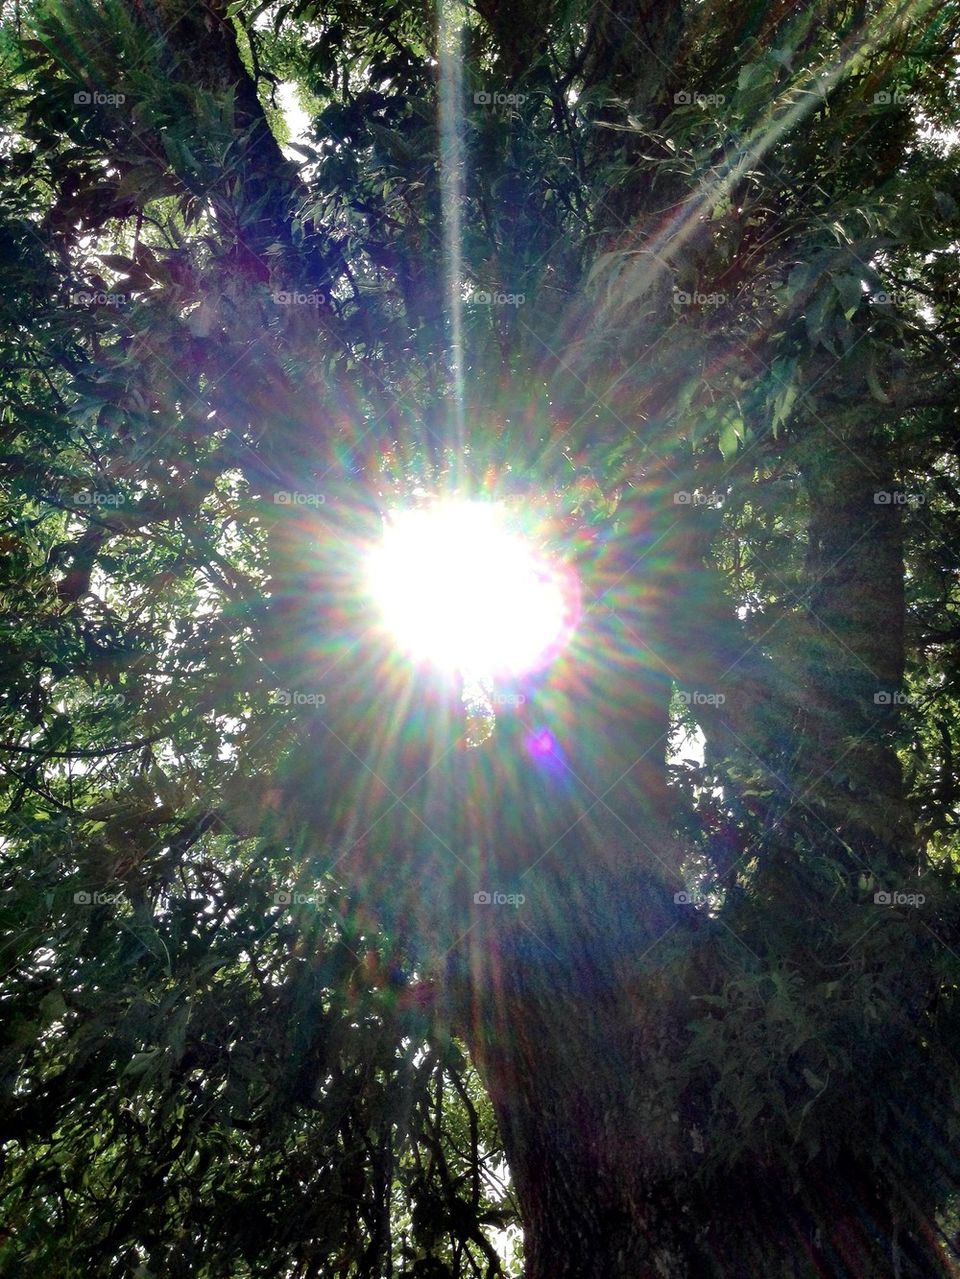 The sun in the tree!